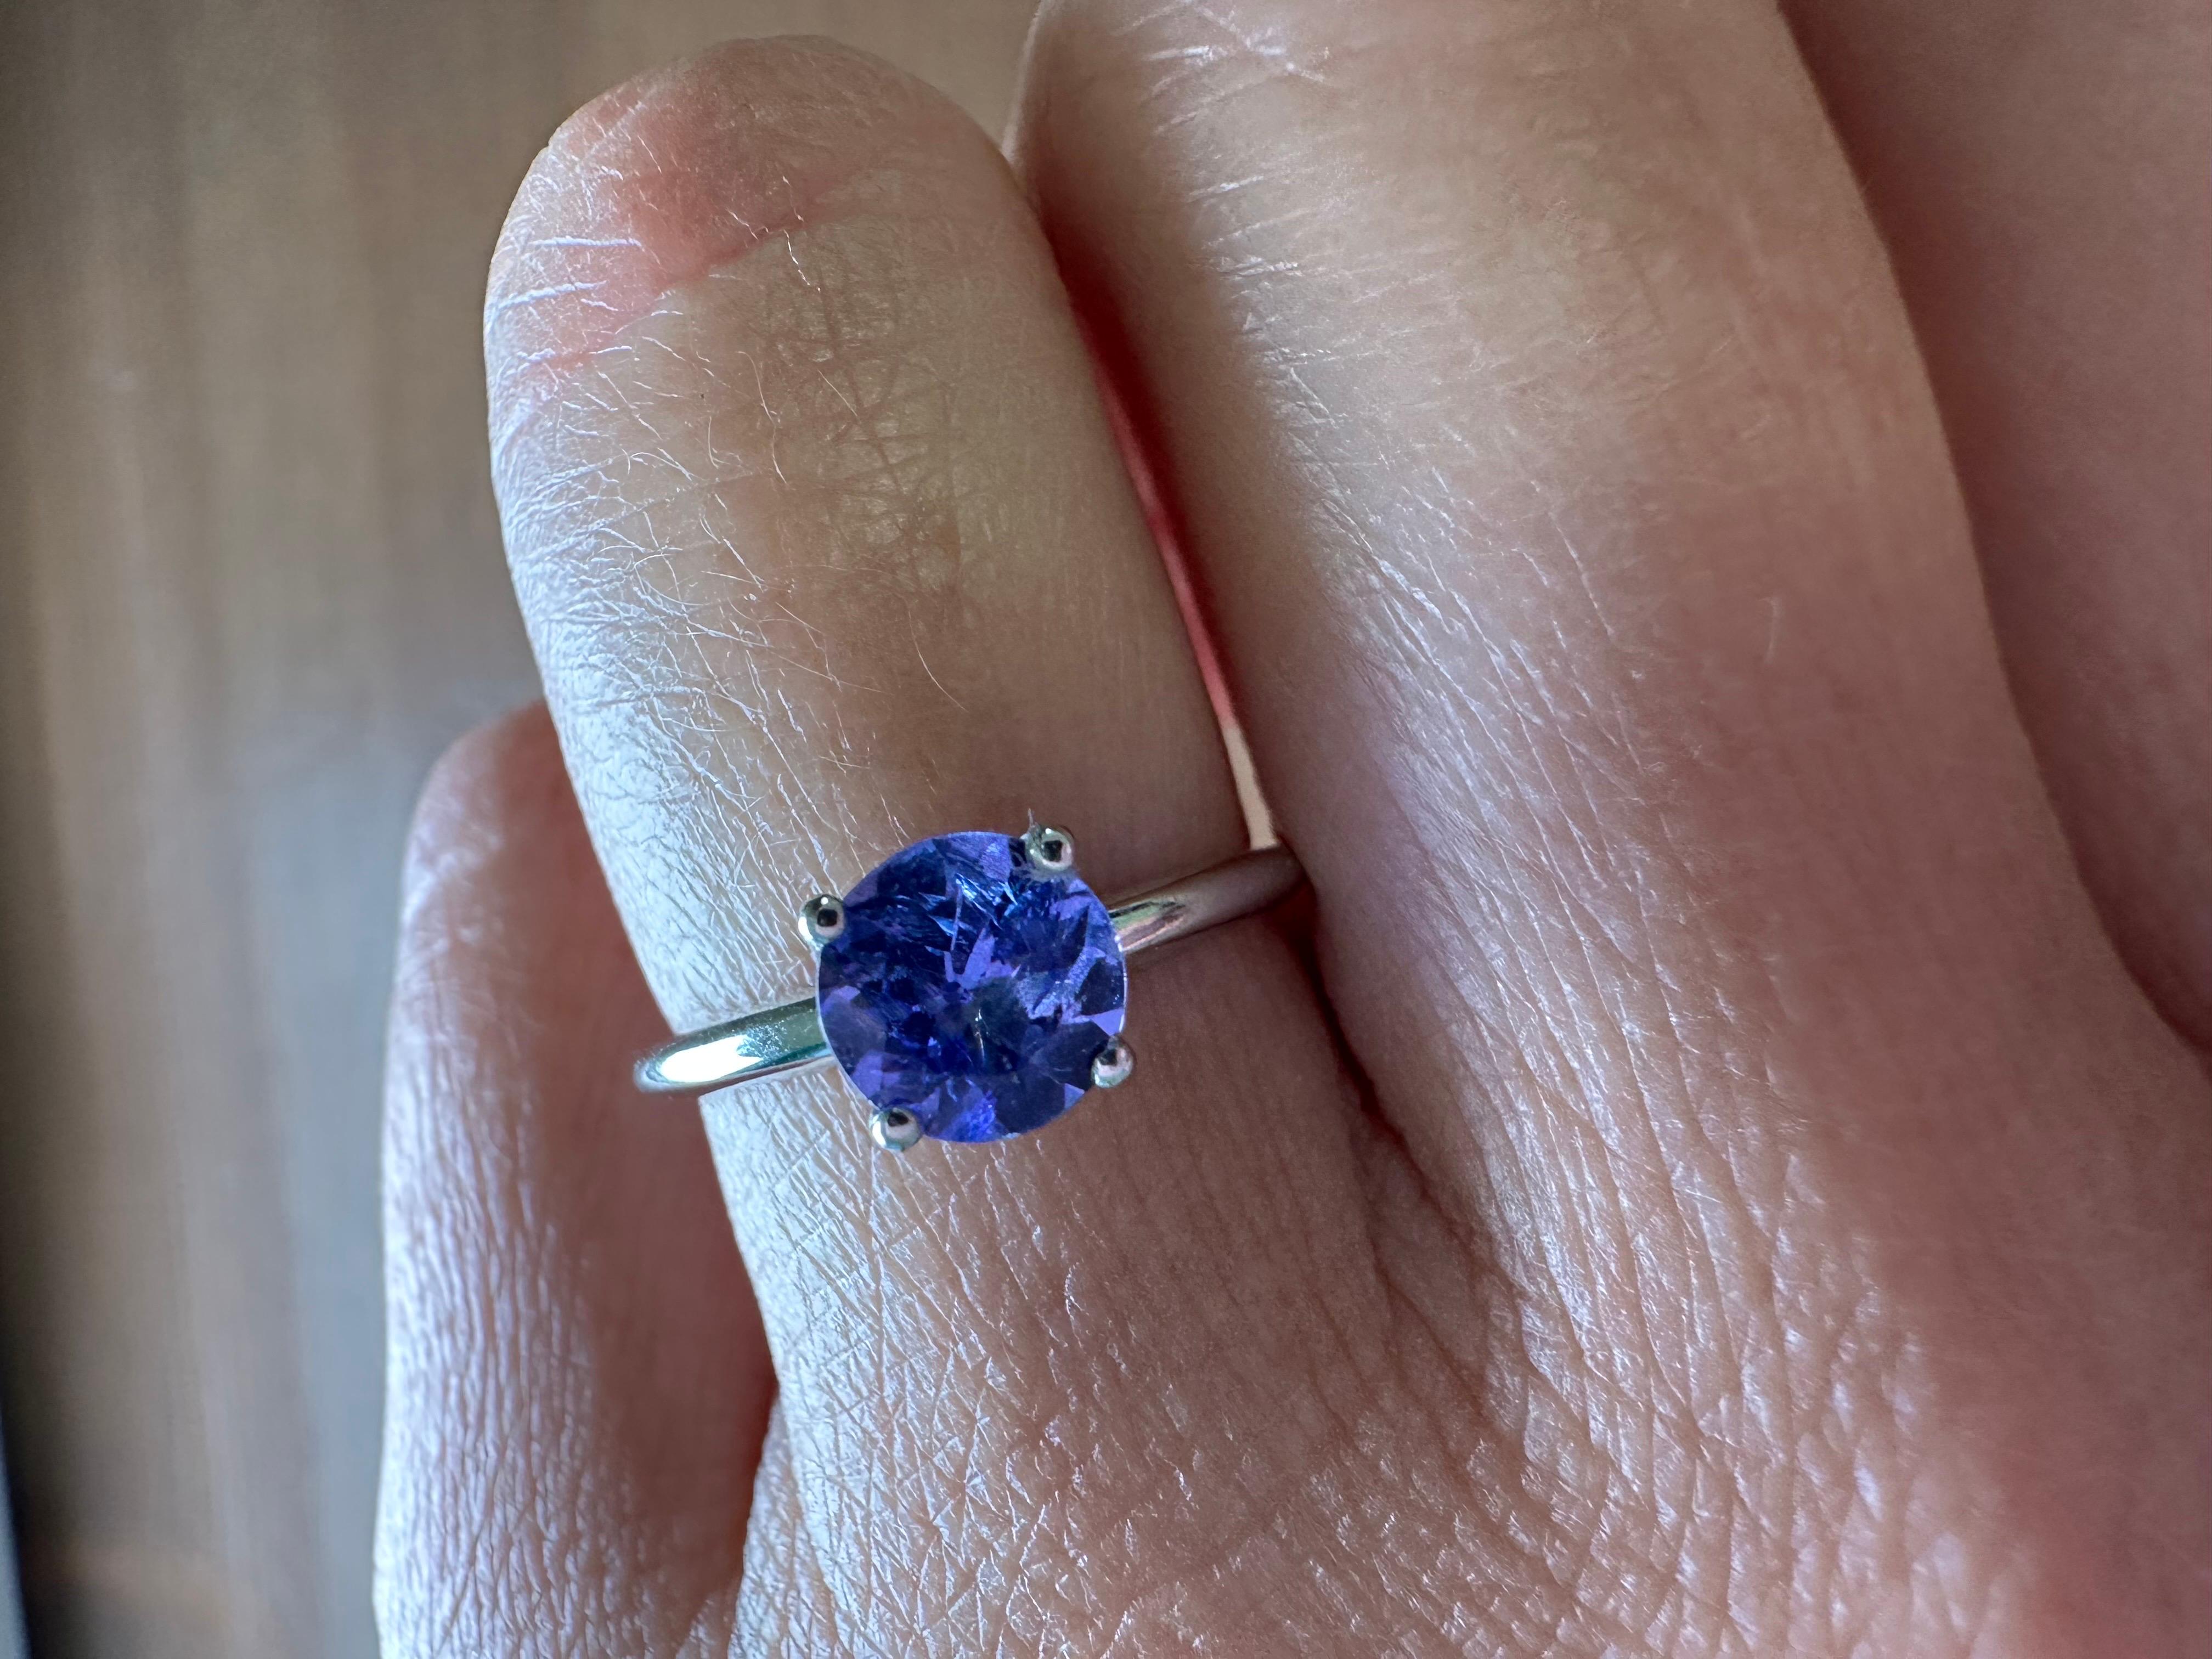 Modern solitaire ring with 1ct tanzanite in 14KT white gold!

Metal Type: 14KT

Natural Tanzanite(s):
Color: Violet
Cut:Round
Carat: 1.02ct
Clarity: Moderately Included

Certificate of authenticity comes with purchase

ABOUT US
We are a family-owned